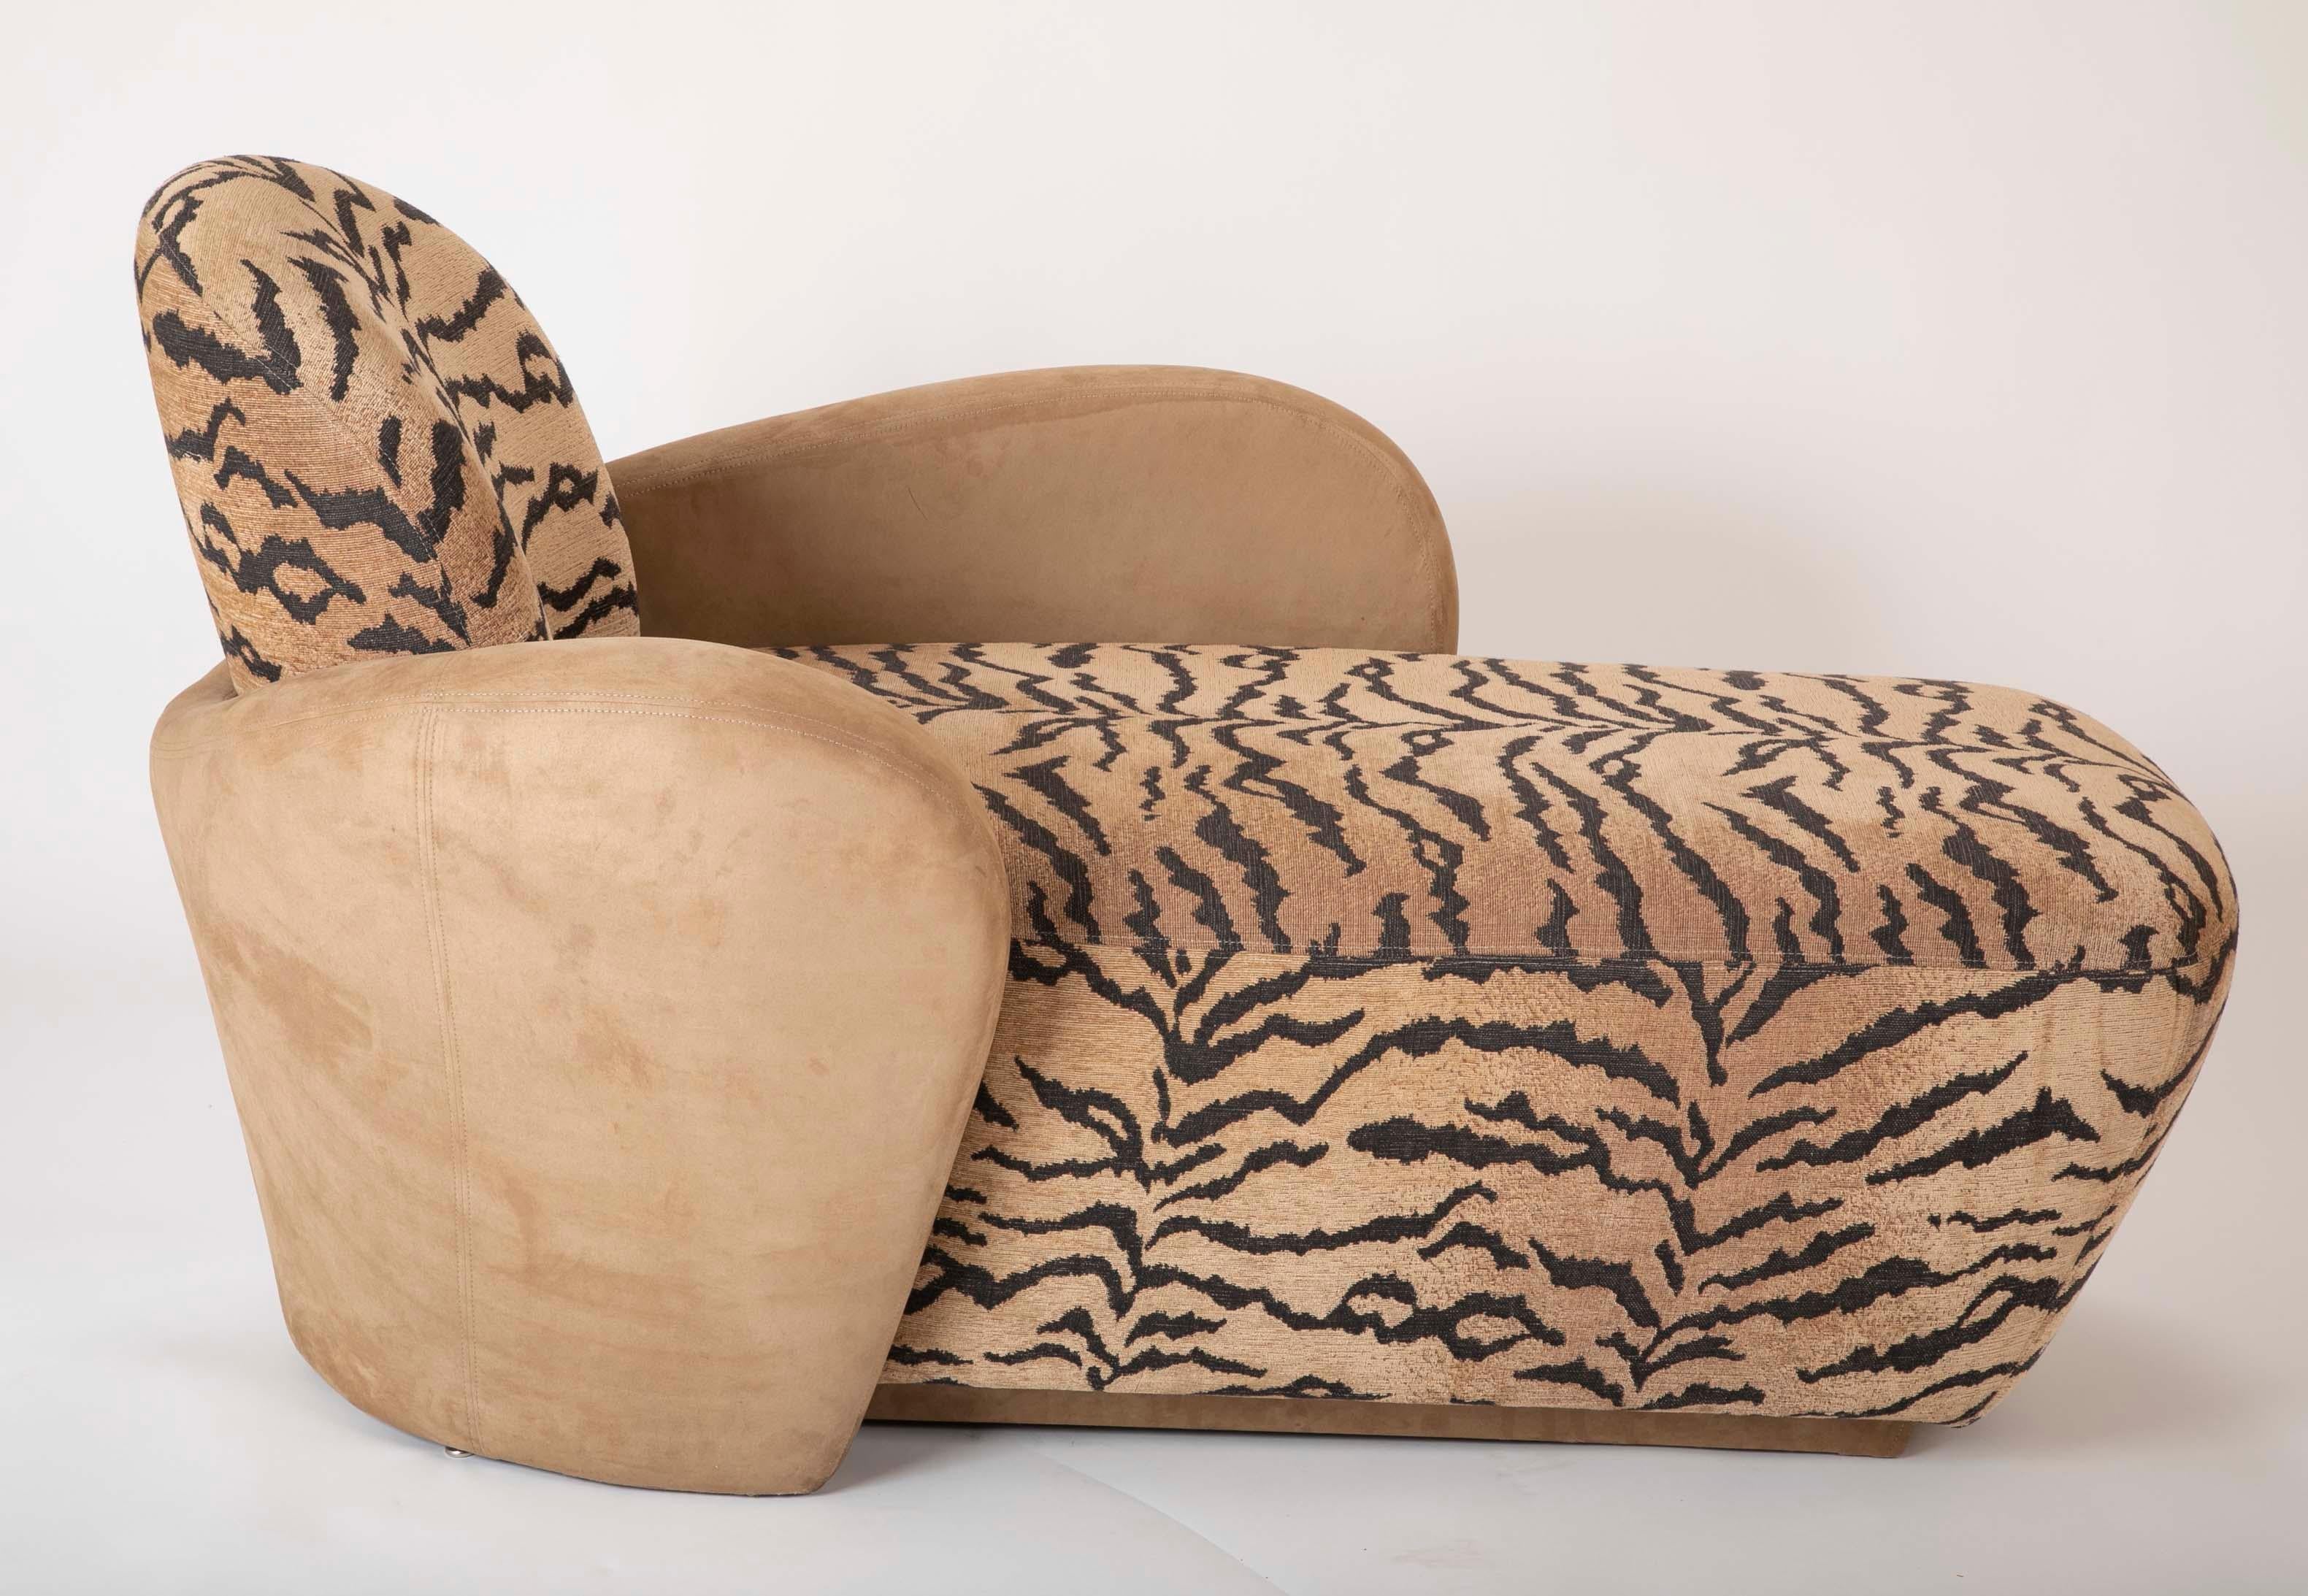 Midcentury Sofa/Chaise in Suede Leather and Tiger Fabric For Sale 9